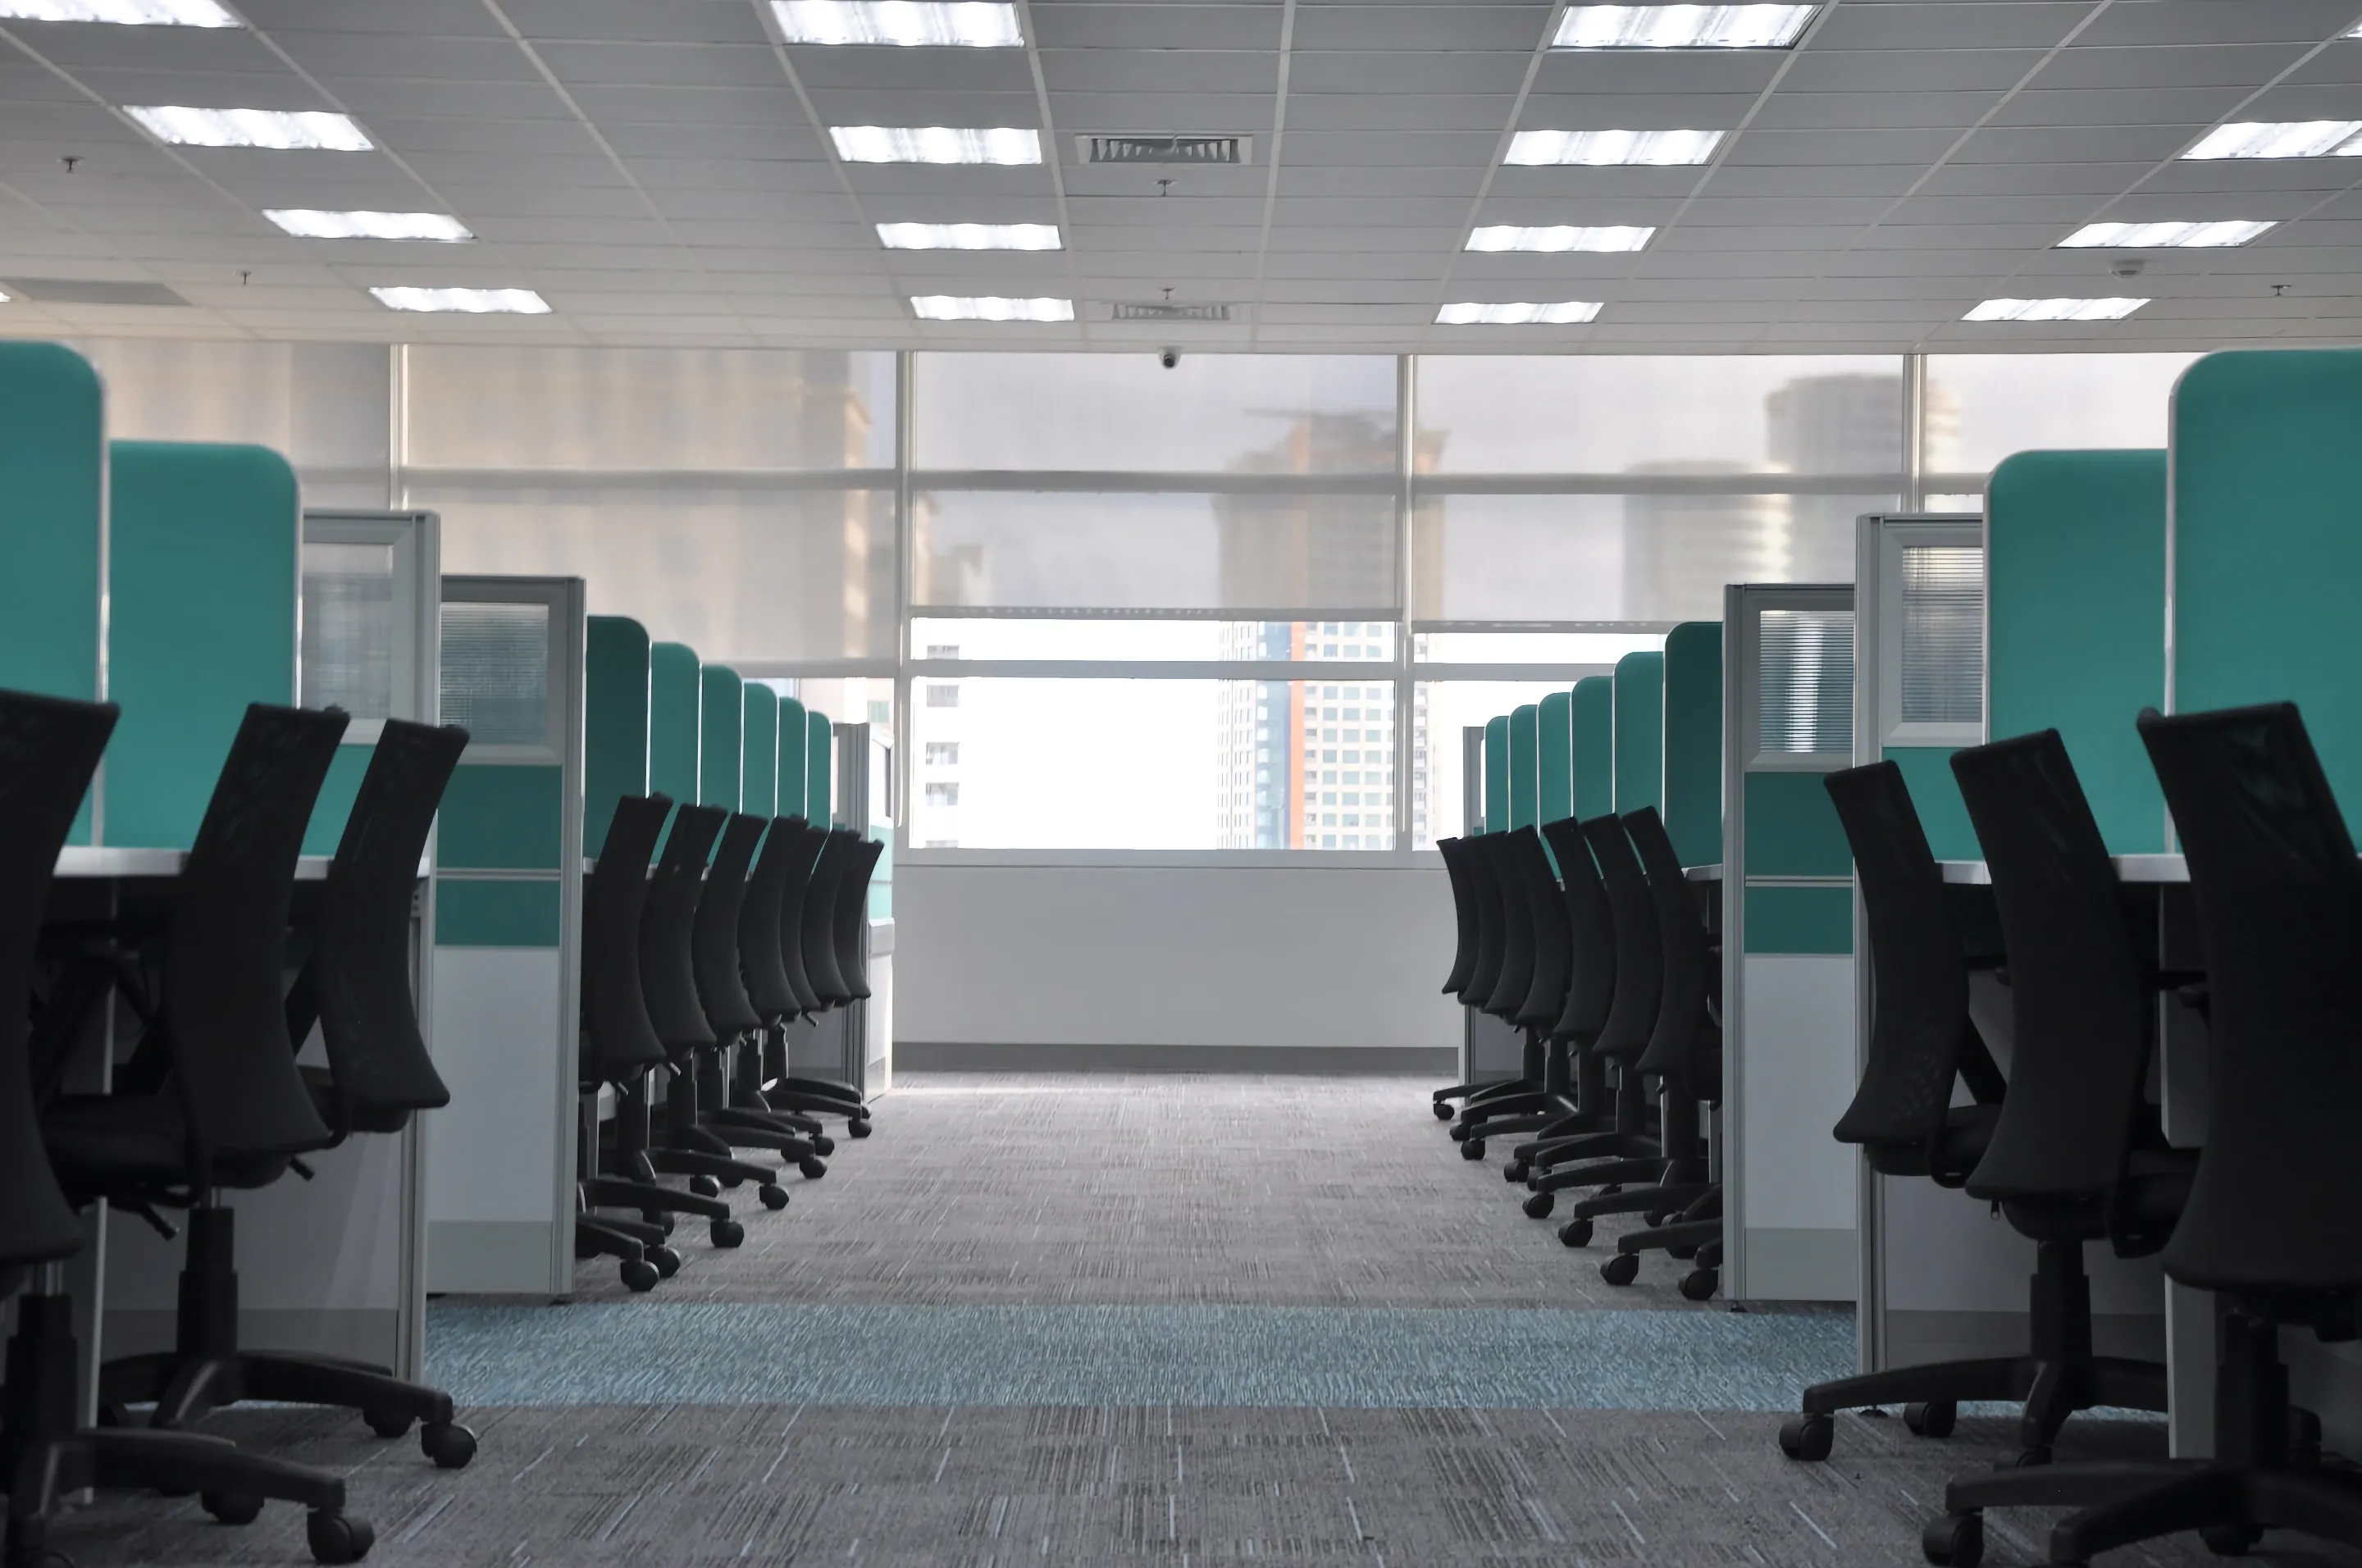 Rows of cubicles in a corporate office building.